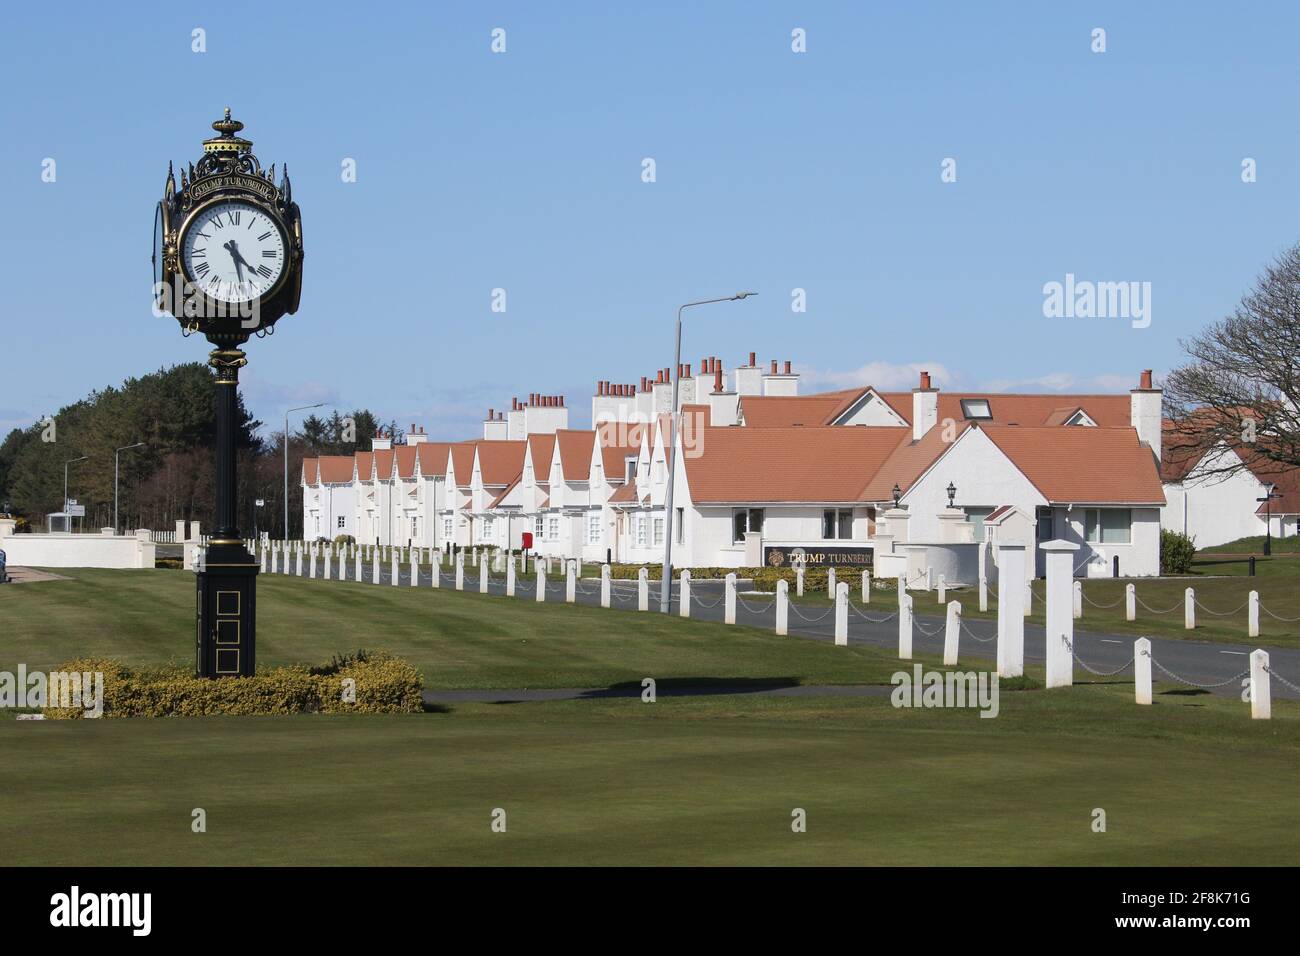 Scotland, Turnberry, Ayrshire, 12 April 2021. Large clock outside Turnberry Club house with the name of Trump on it & lodges in background Stock Photo